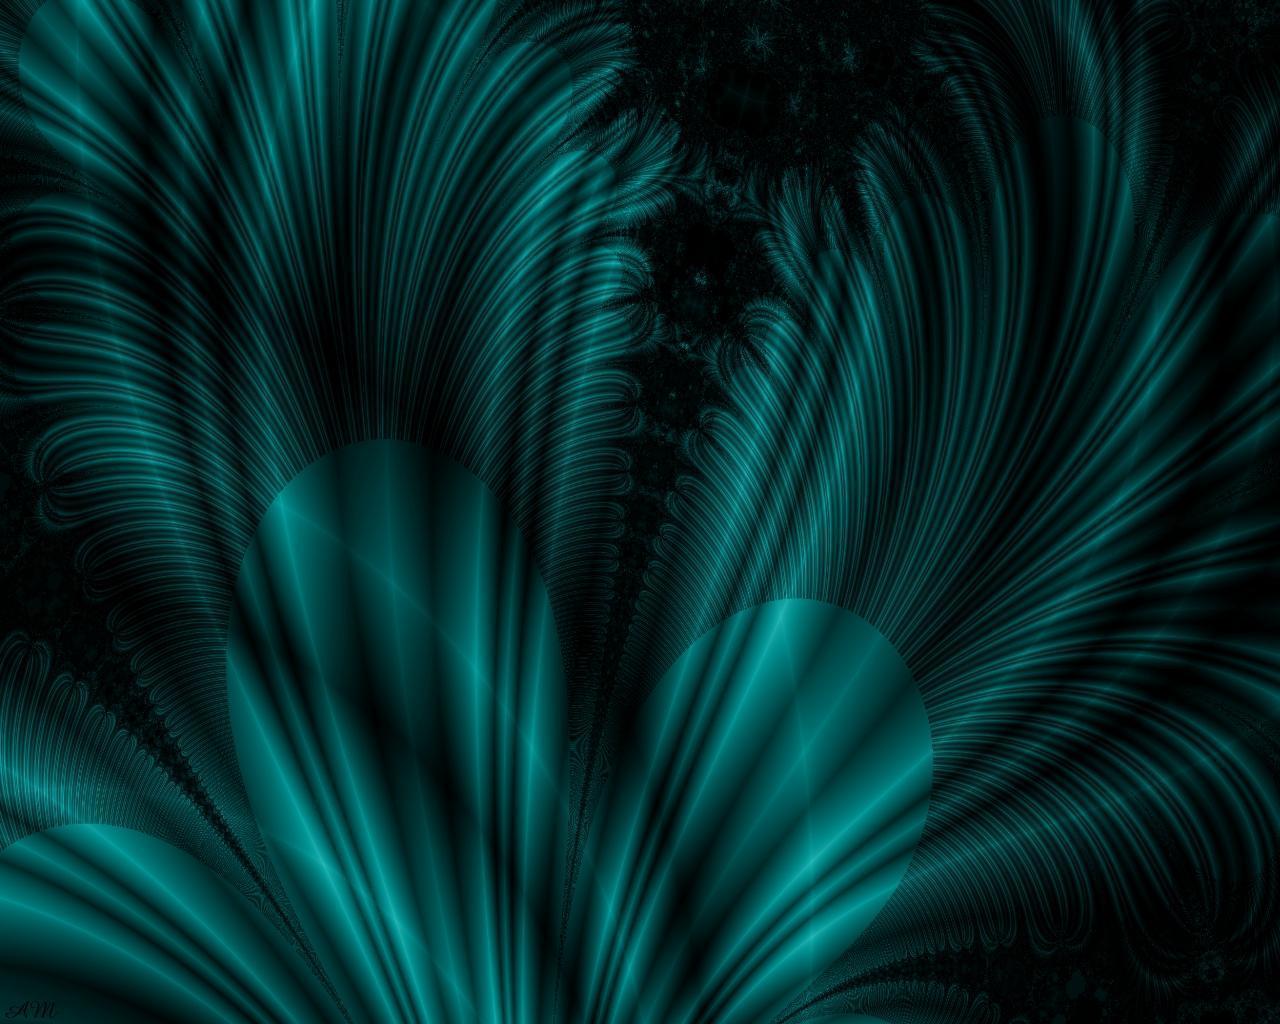 Turquoise And Black Wallpaper & Background Beautiful Best Available For Download Turquoise And Black Photo Free On Zicxa.com Image